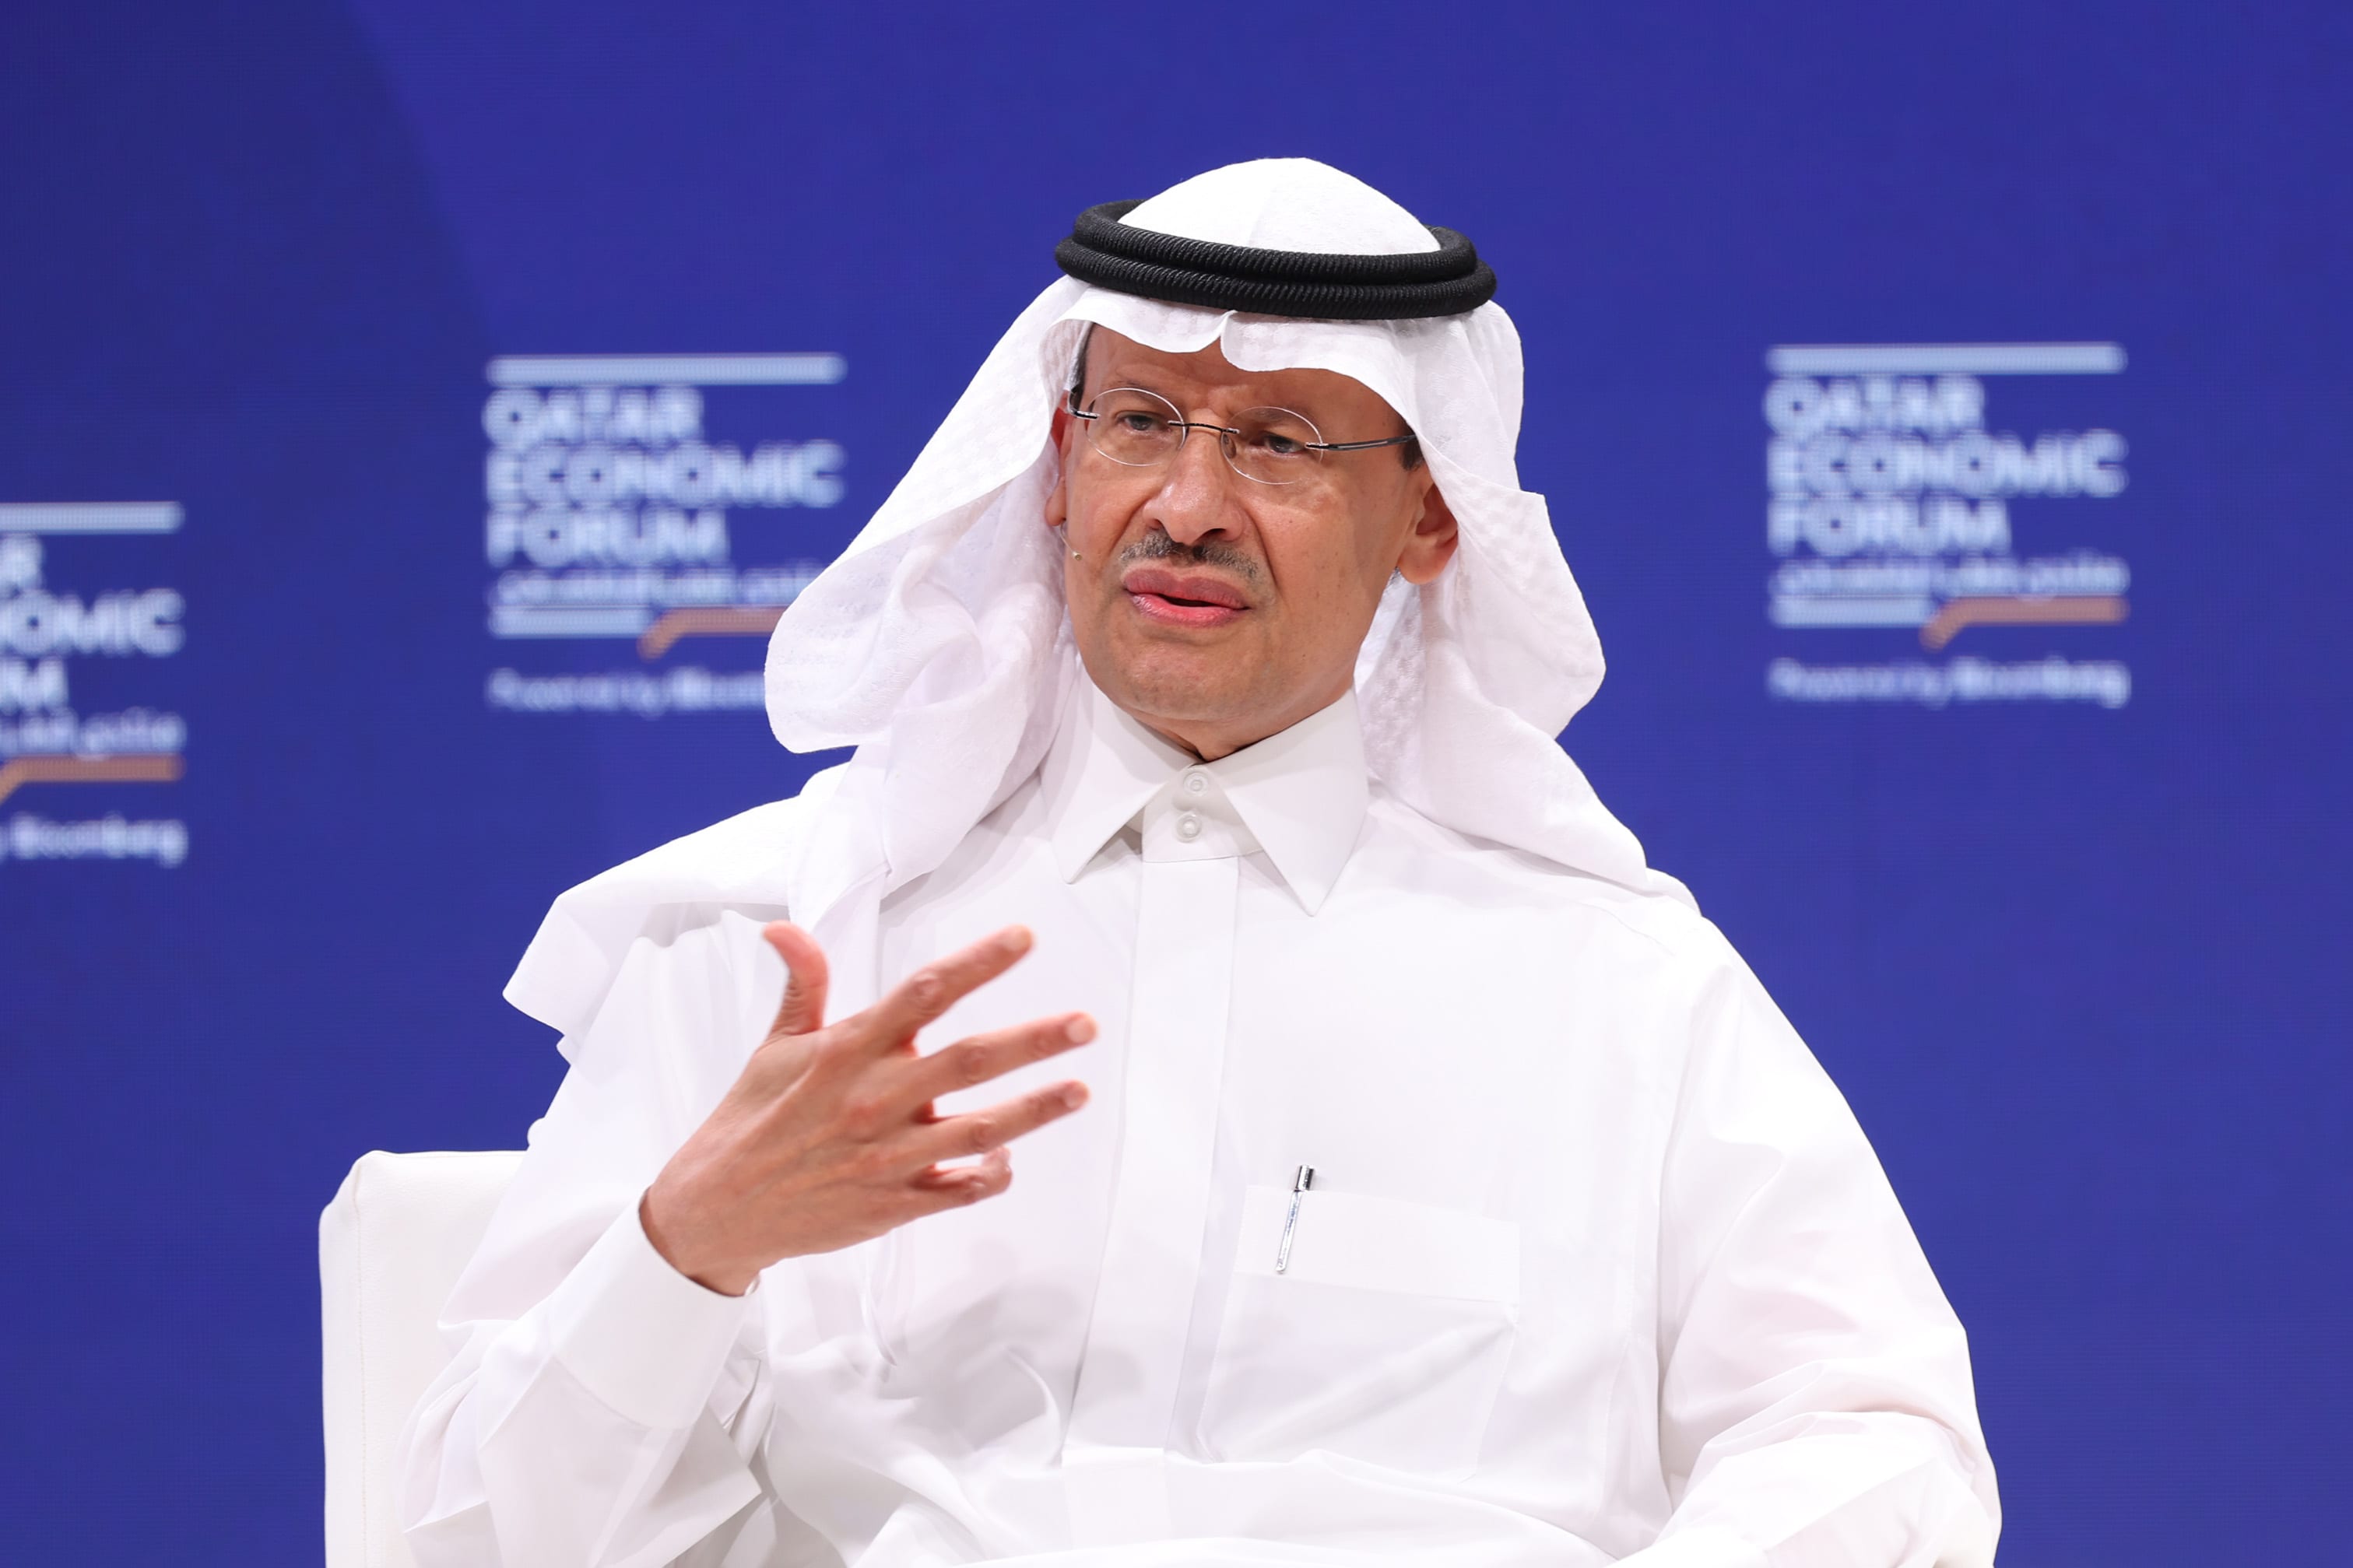 Saudi oil minister warns market speculators to ‘watch out’ ahead of OPEC+ meeting